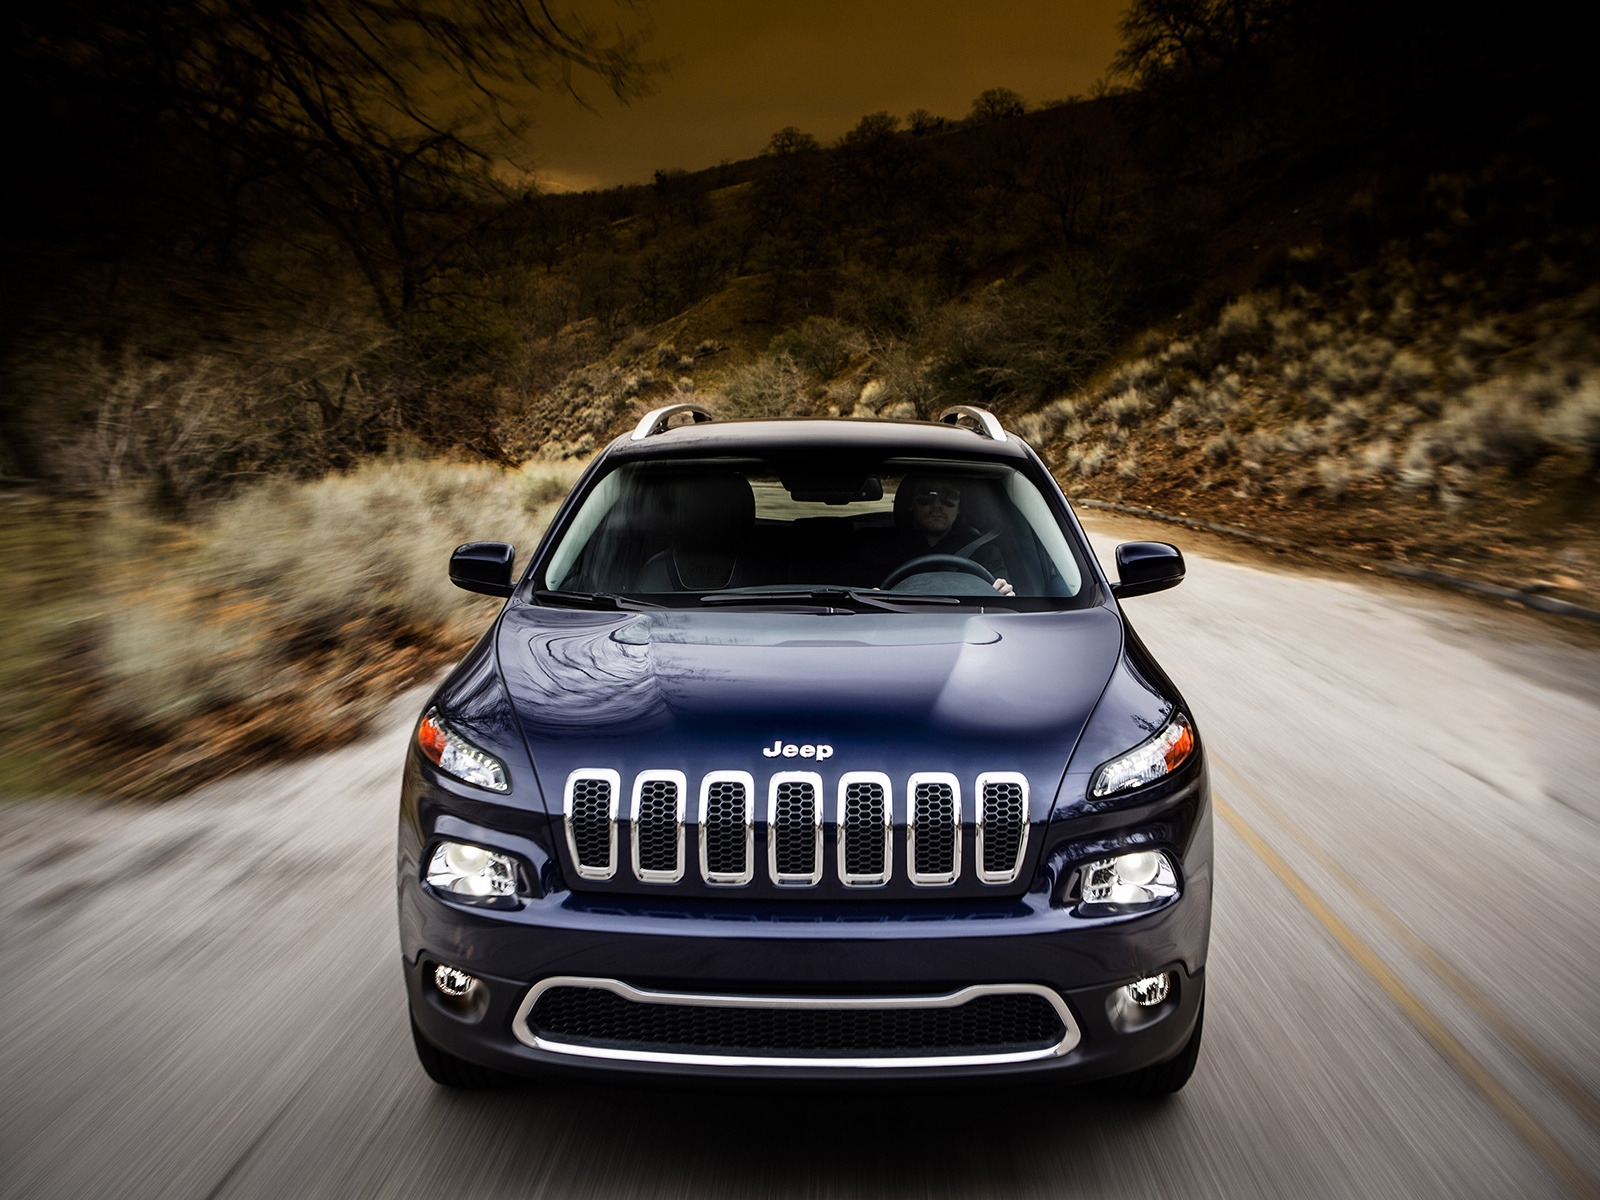 2014 Jeep Cherokee for 1600 x 1200 resolution